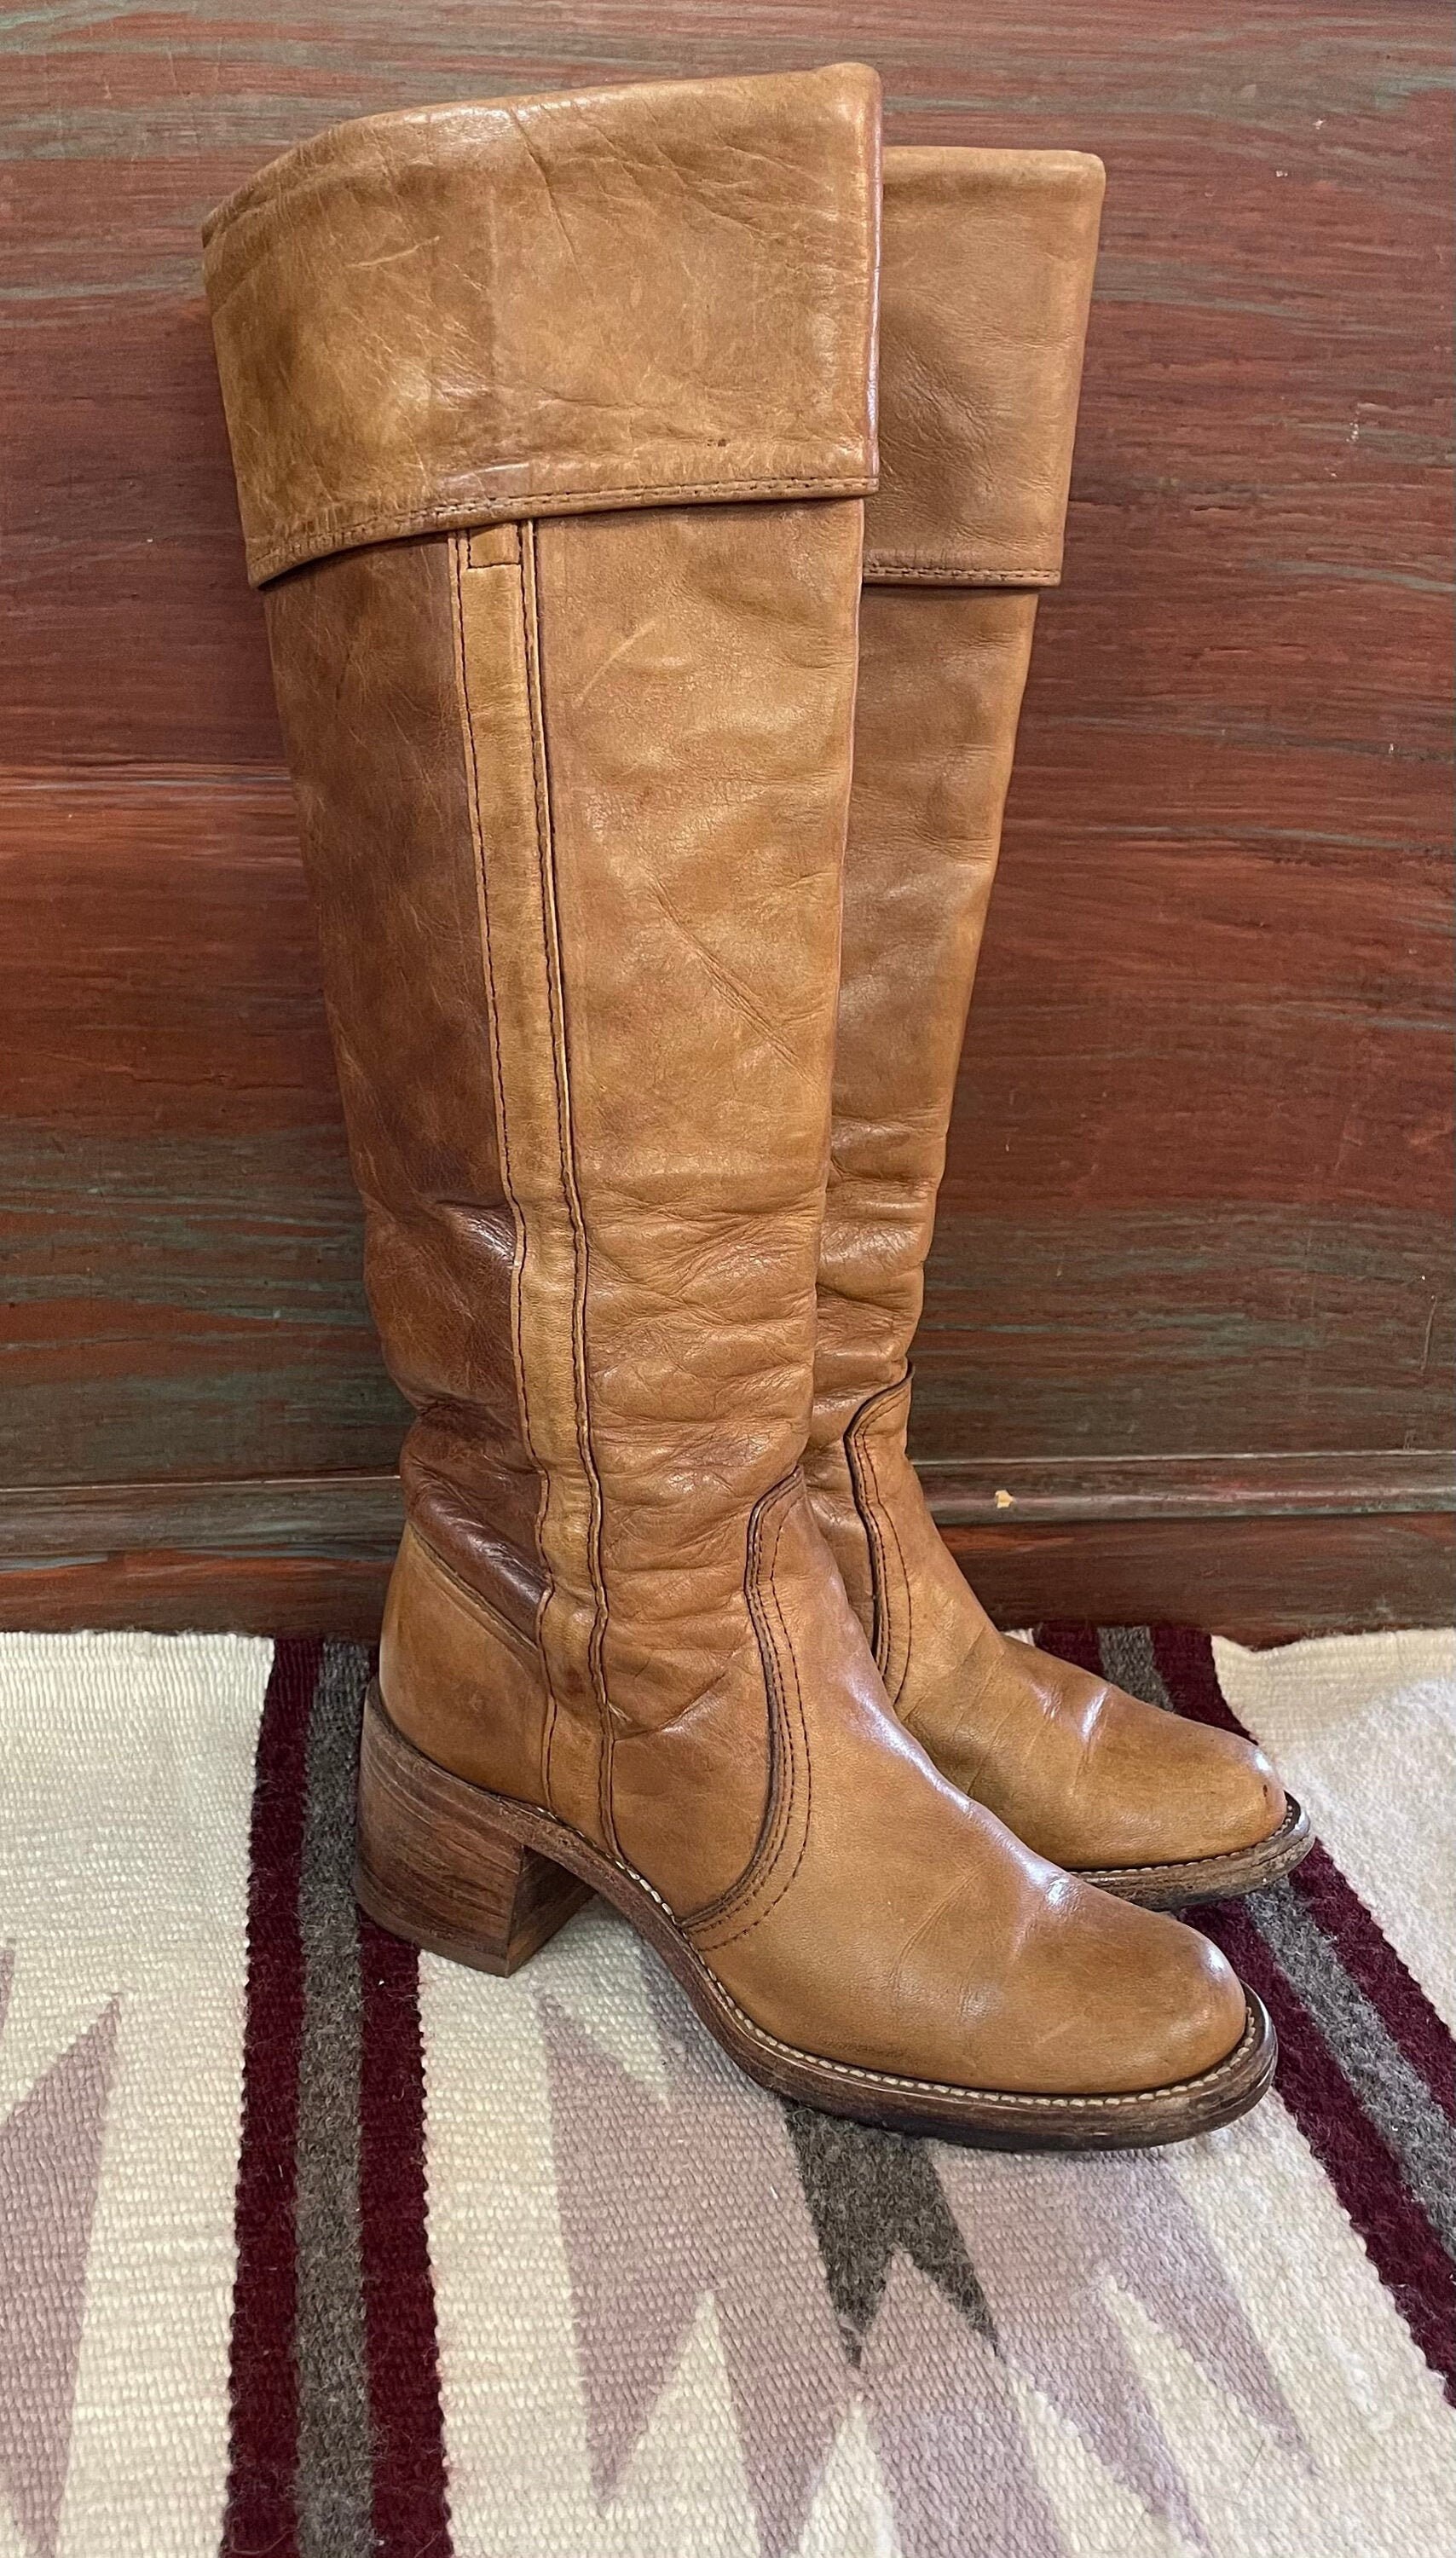 Vintage Frye Black Label Tan Leather Tall Campus Boots Sz 5 B 70s Riding